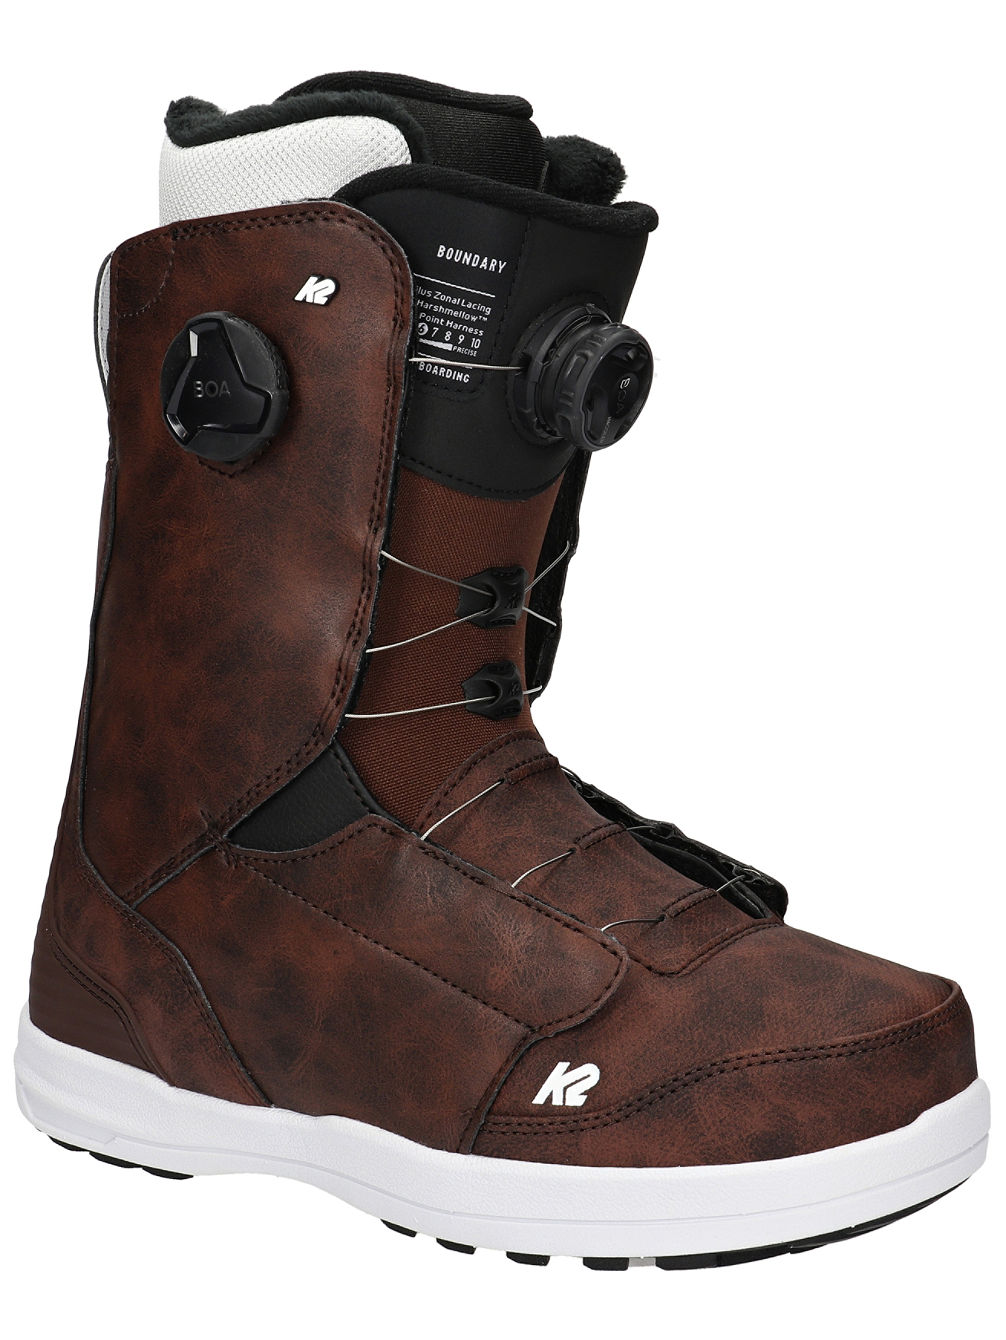 Boundary 2021 Snowboard Boots